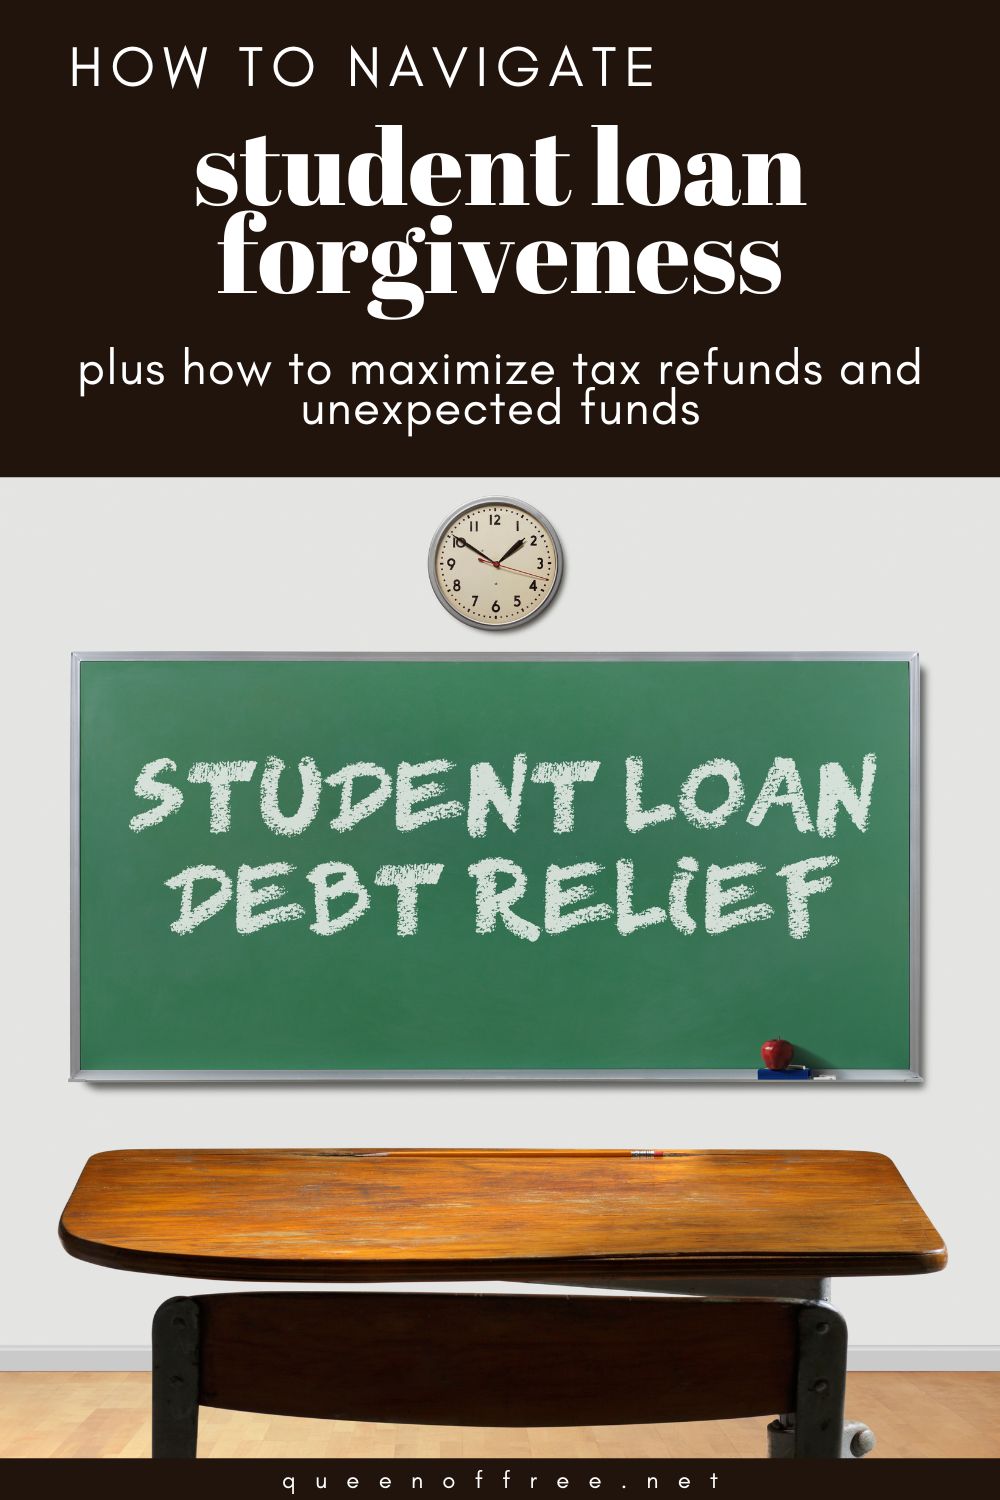 Whether you agree with policy changes or not, student loan forgiveness and recent tax refunds could help your finances or have zero impact.